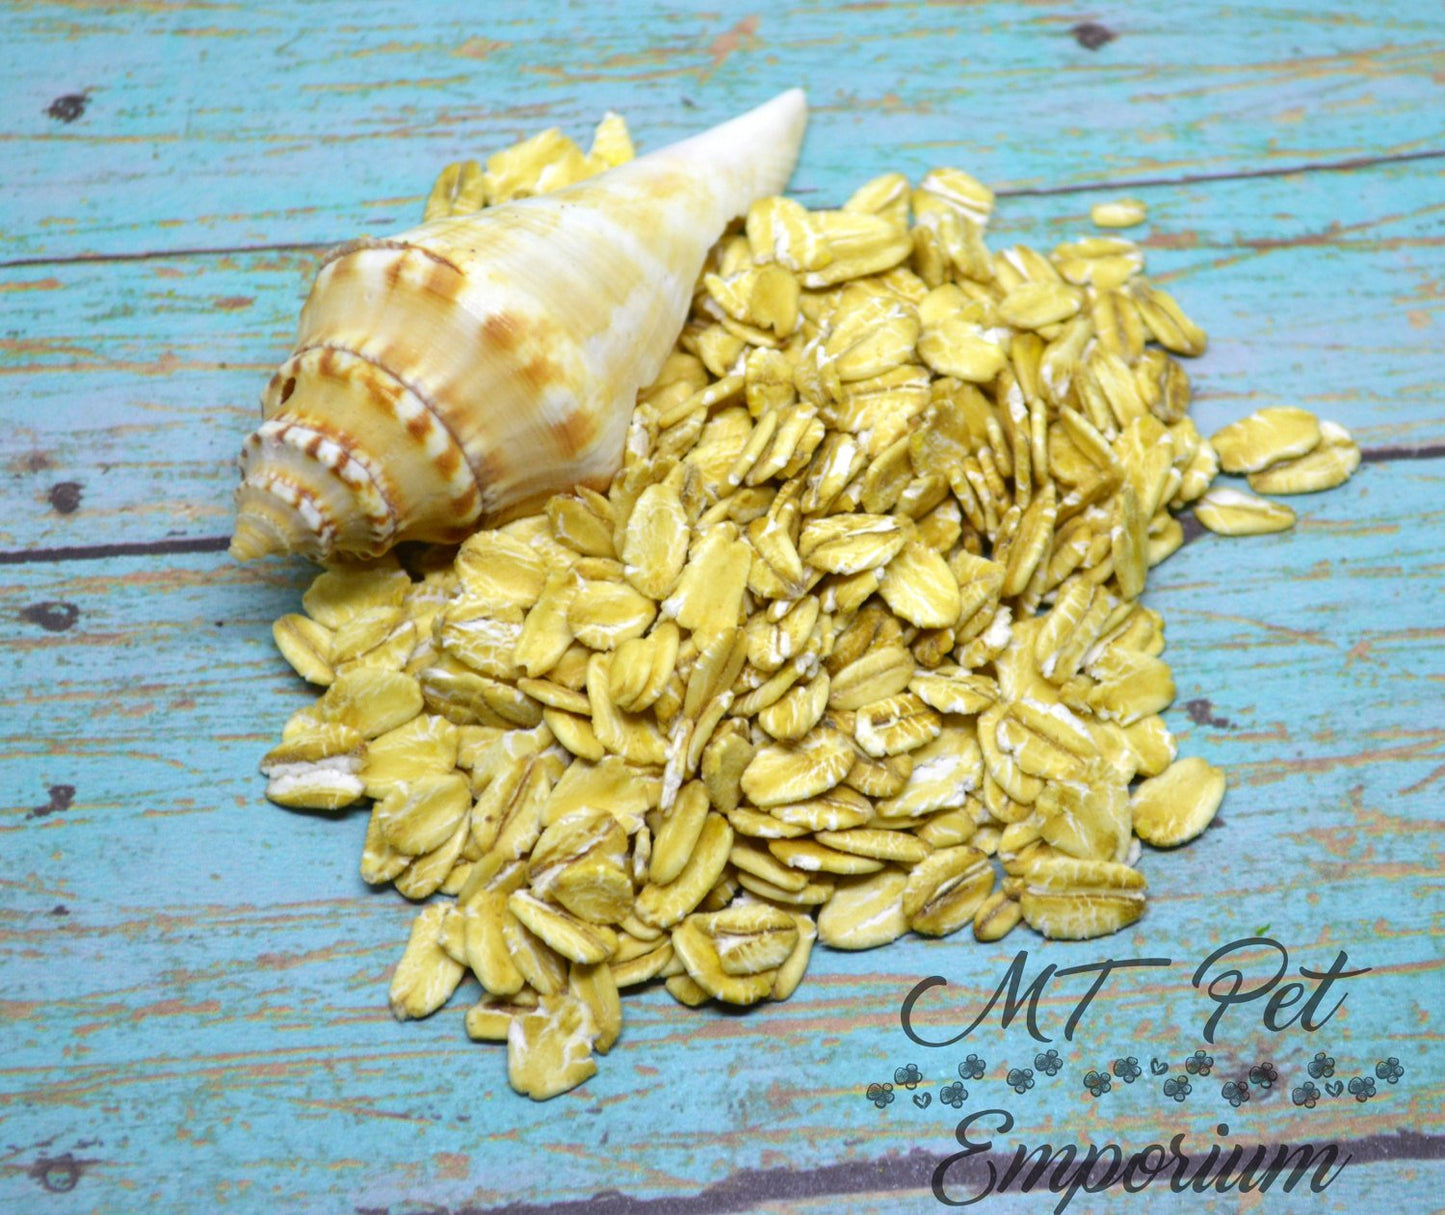 Organic Rolled Oats - Hermit Crab Food